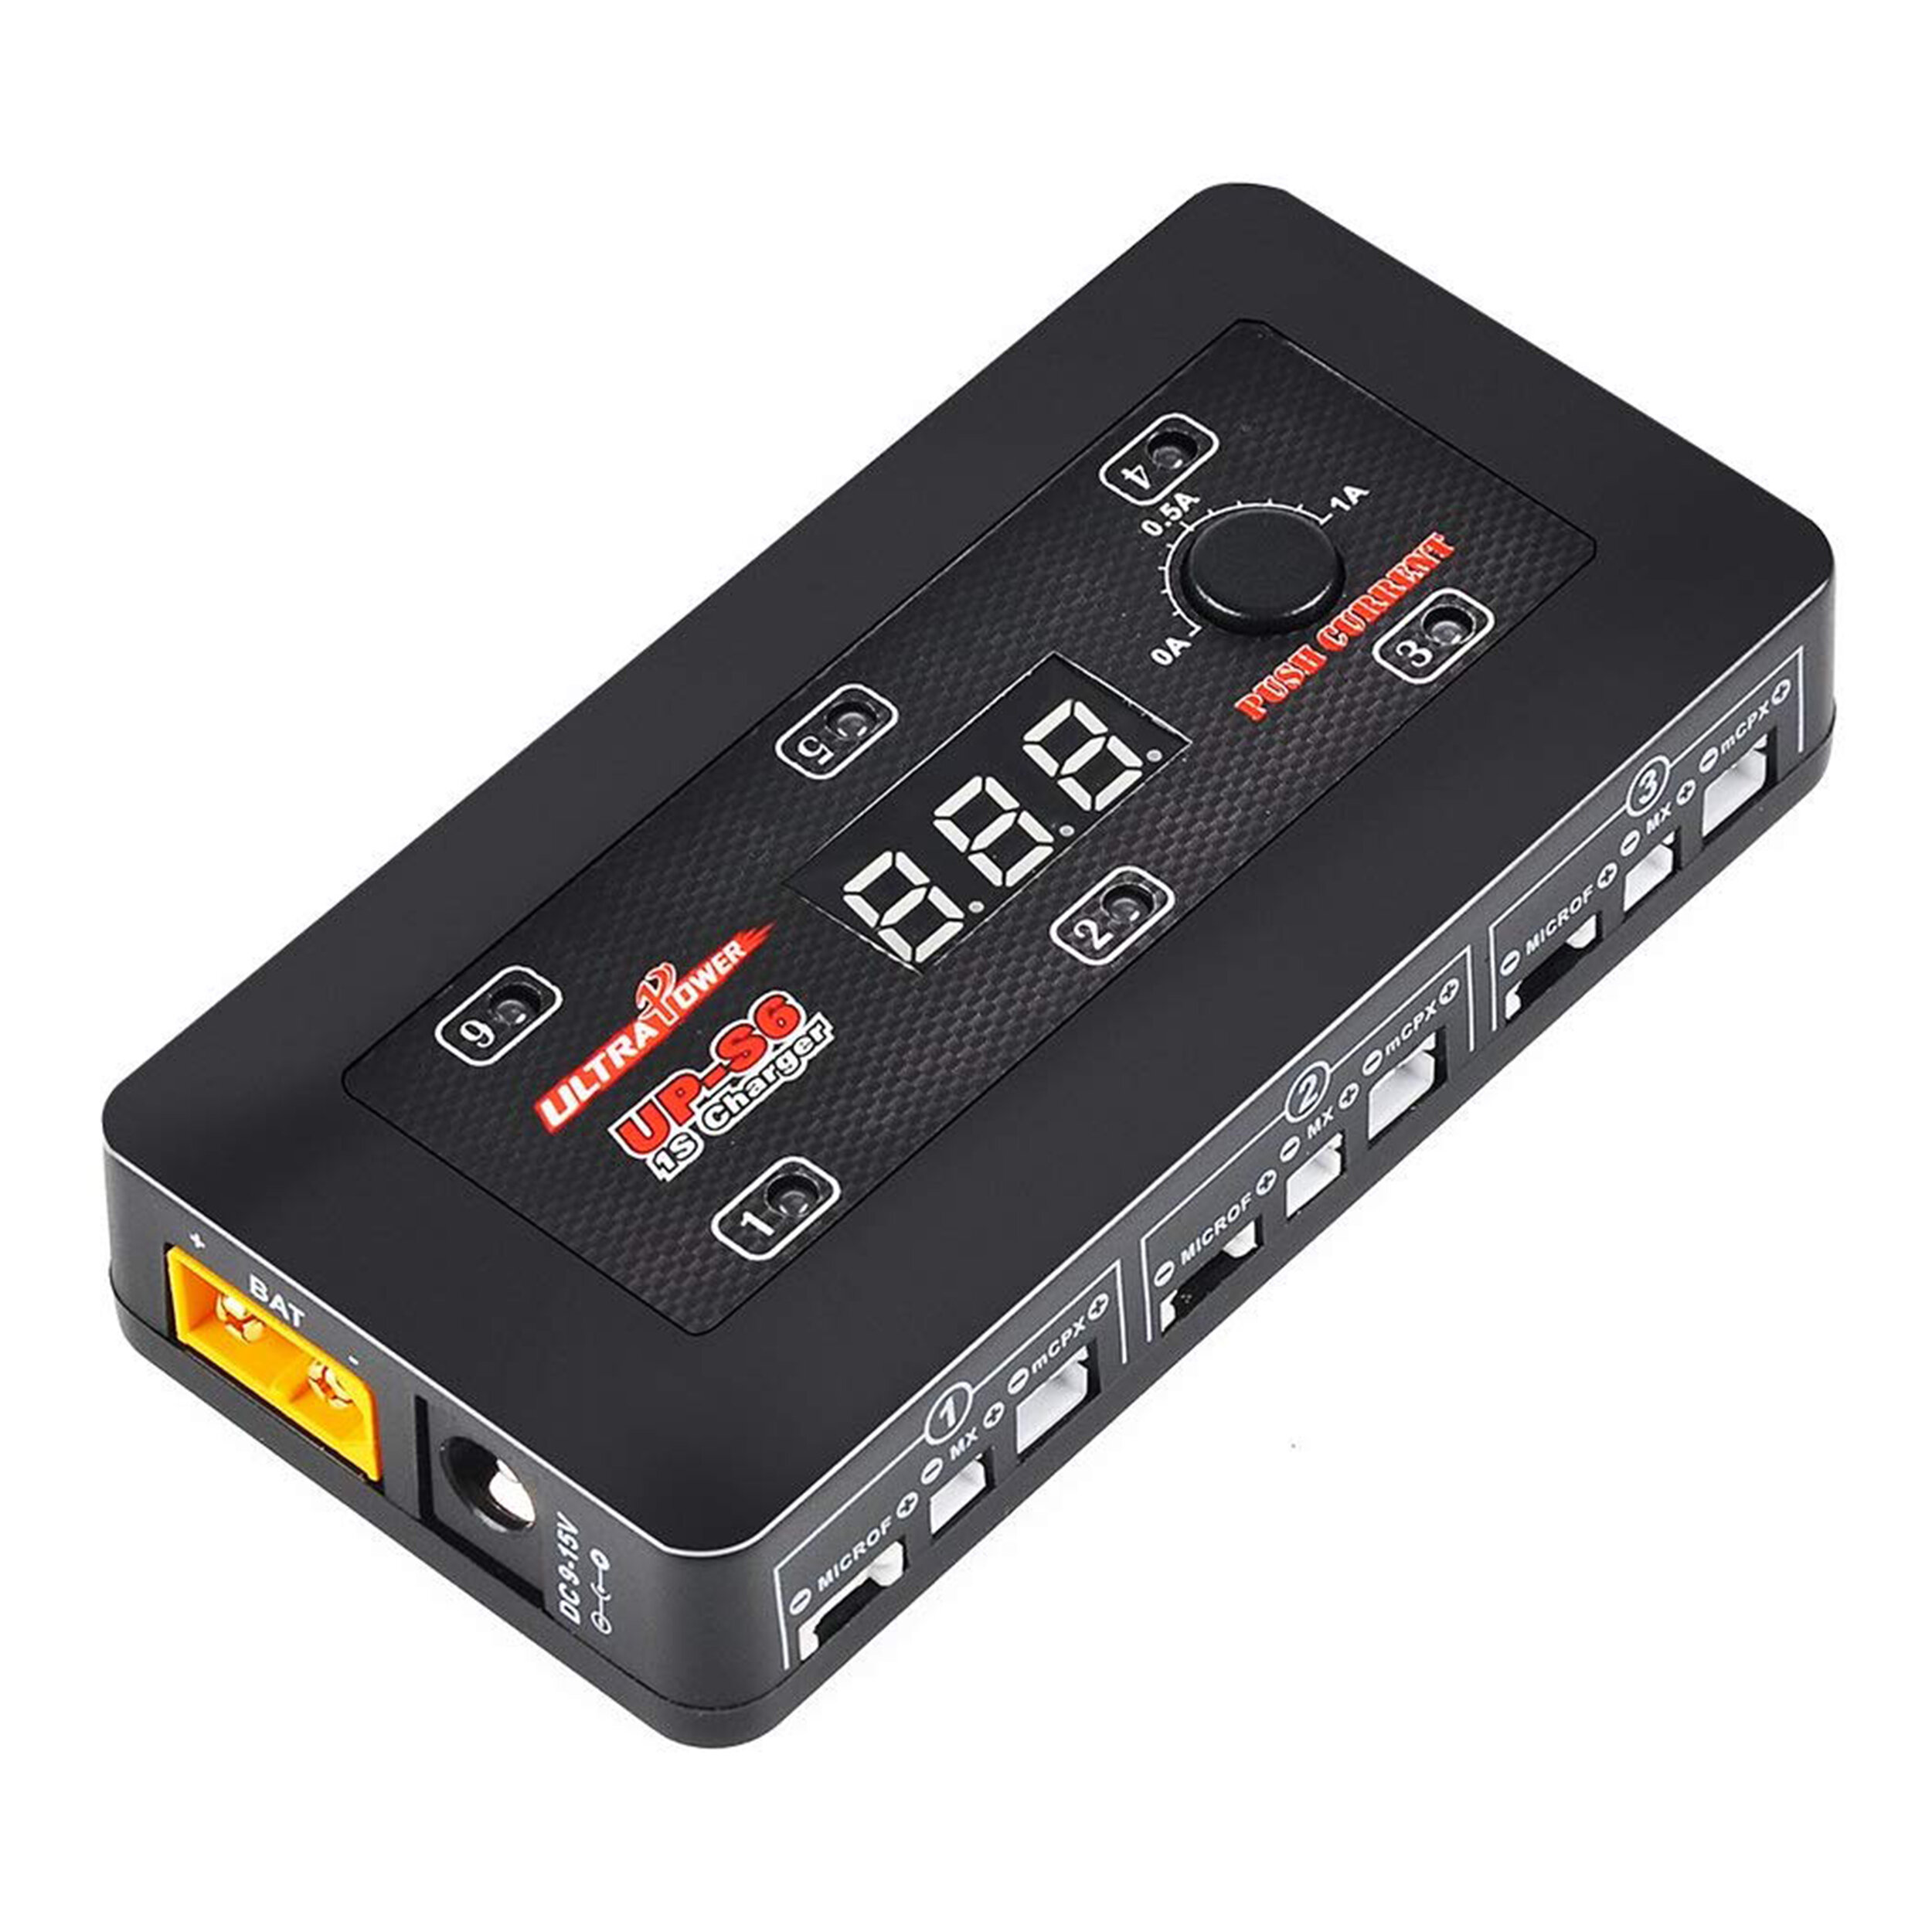 1S LiPo Smart Battery Charger